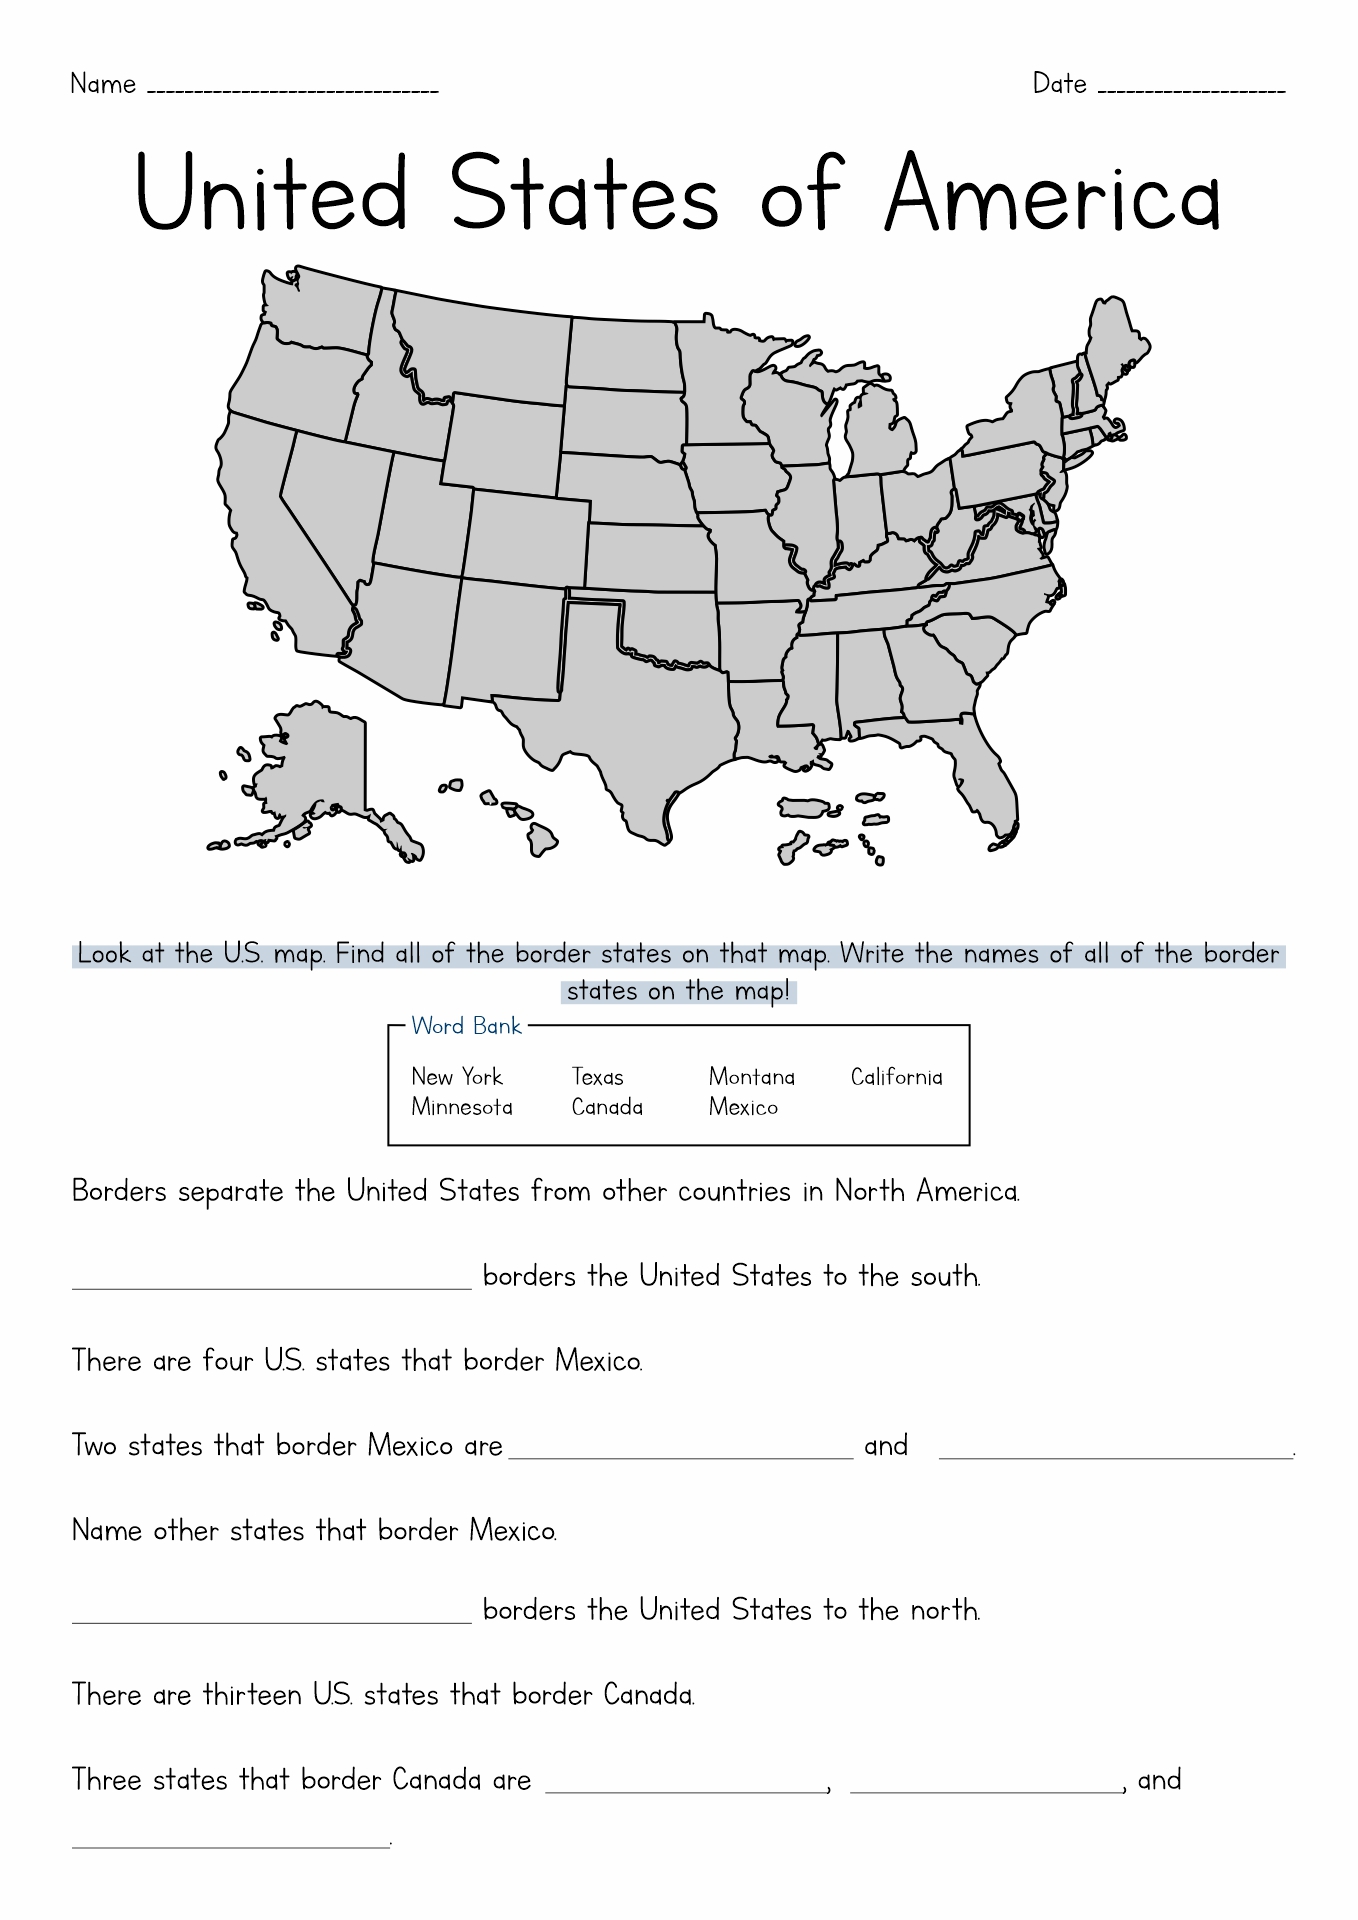 blank-map-of-the-united-states-worksheet